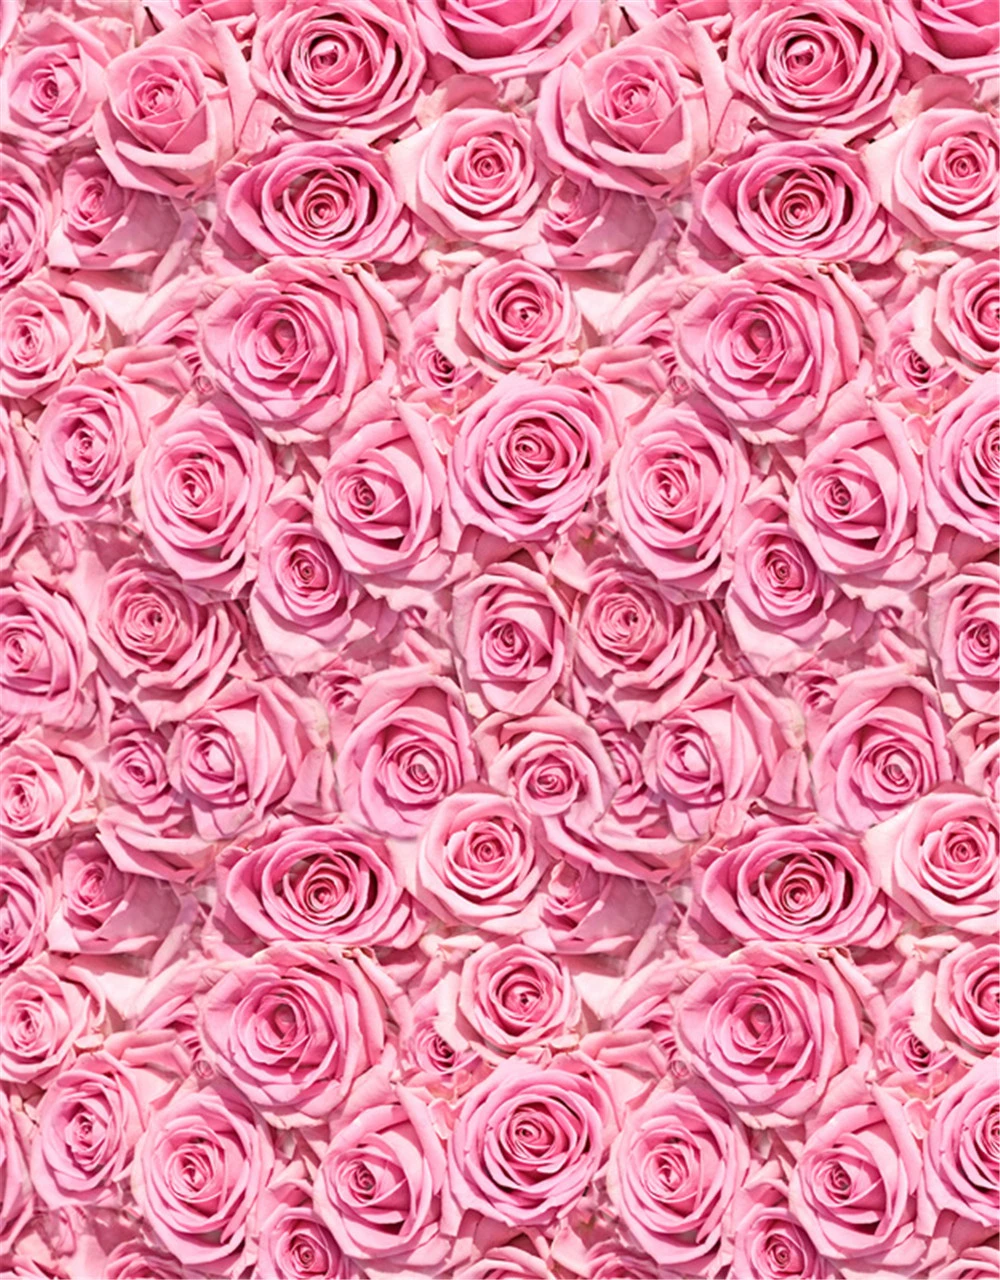 Printed Pink Rose 3d Backgrounds Baby Newborn Photography Props Valentines  Day Flowers Wall Floral Backdrop For Photo Studio - Backgrounds - AliExpress